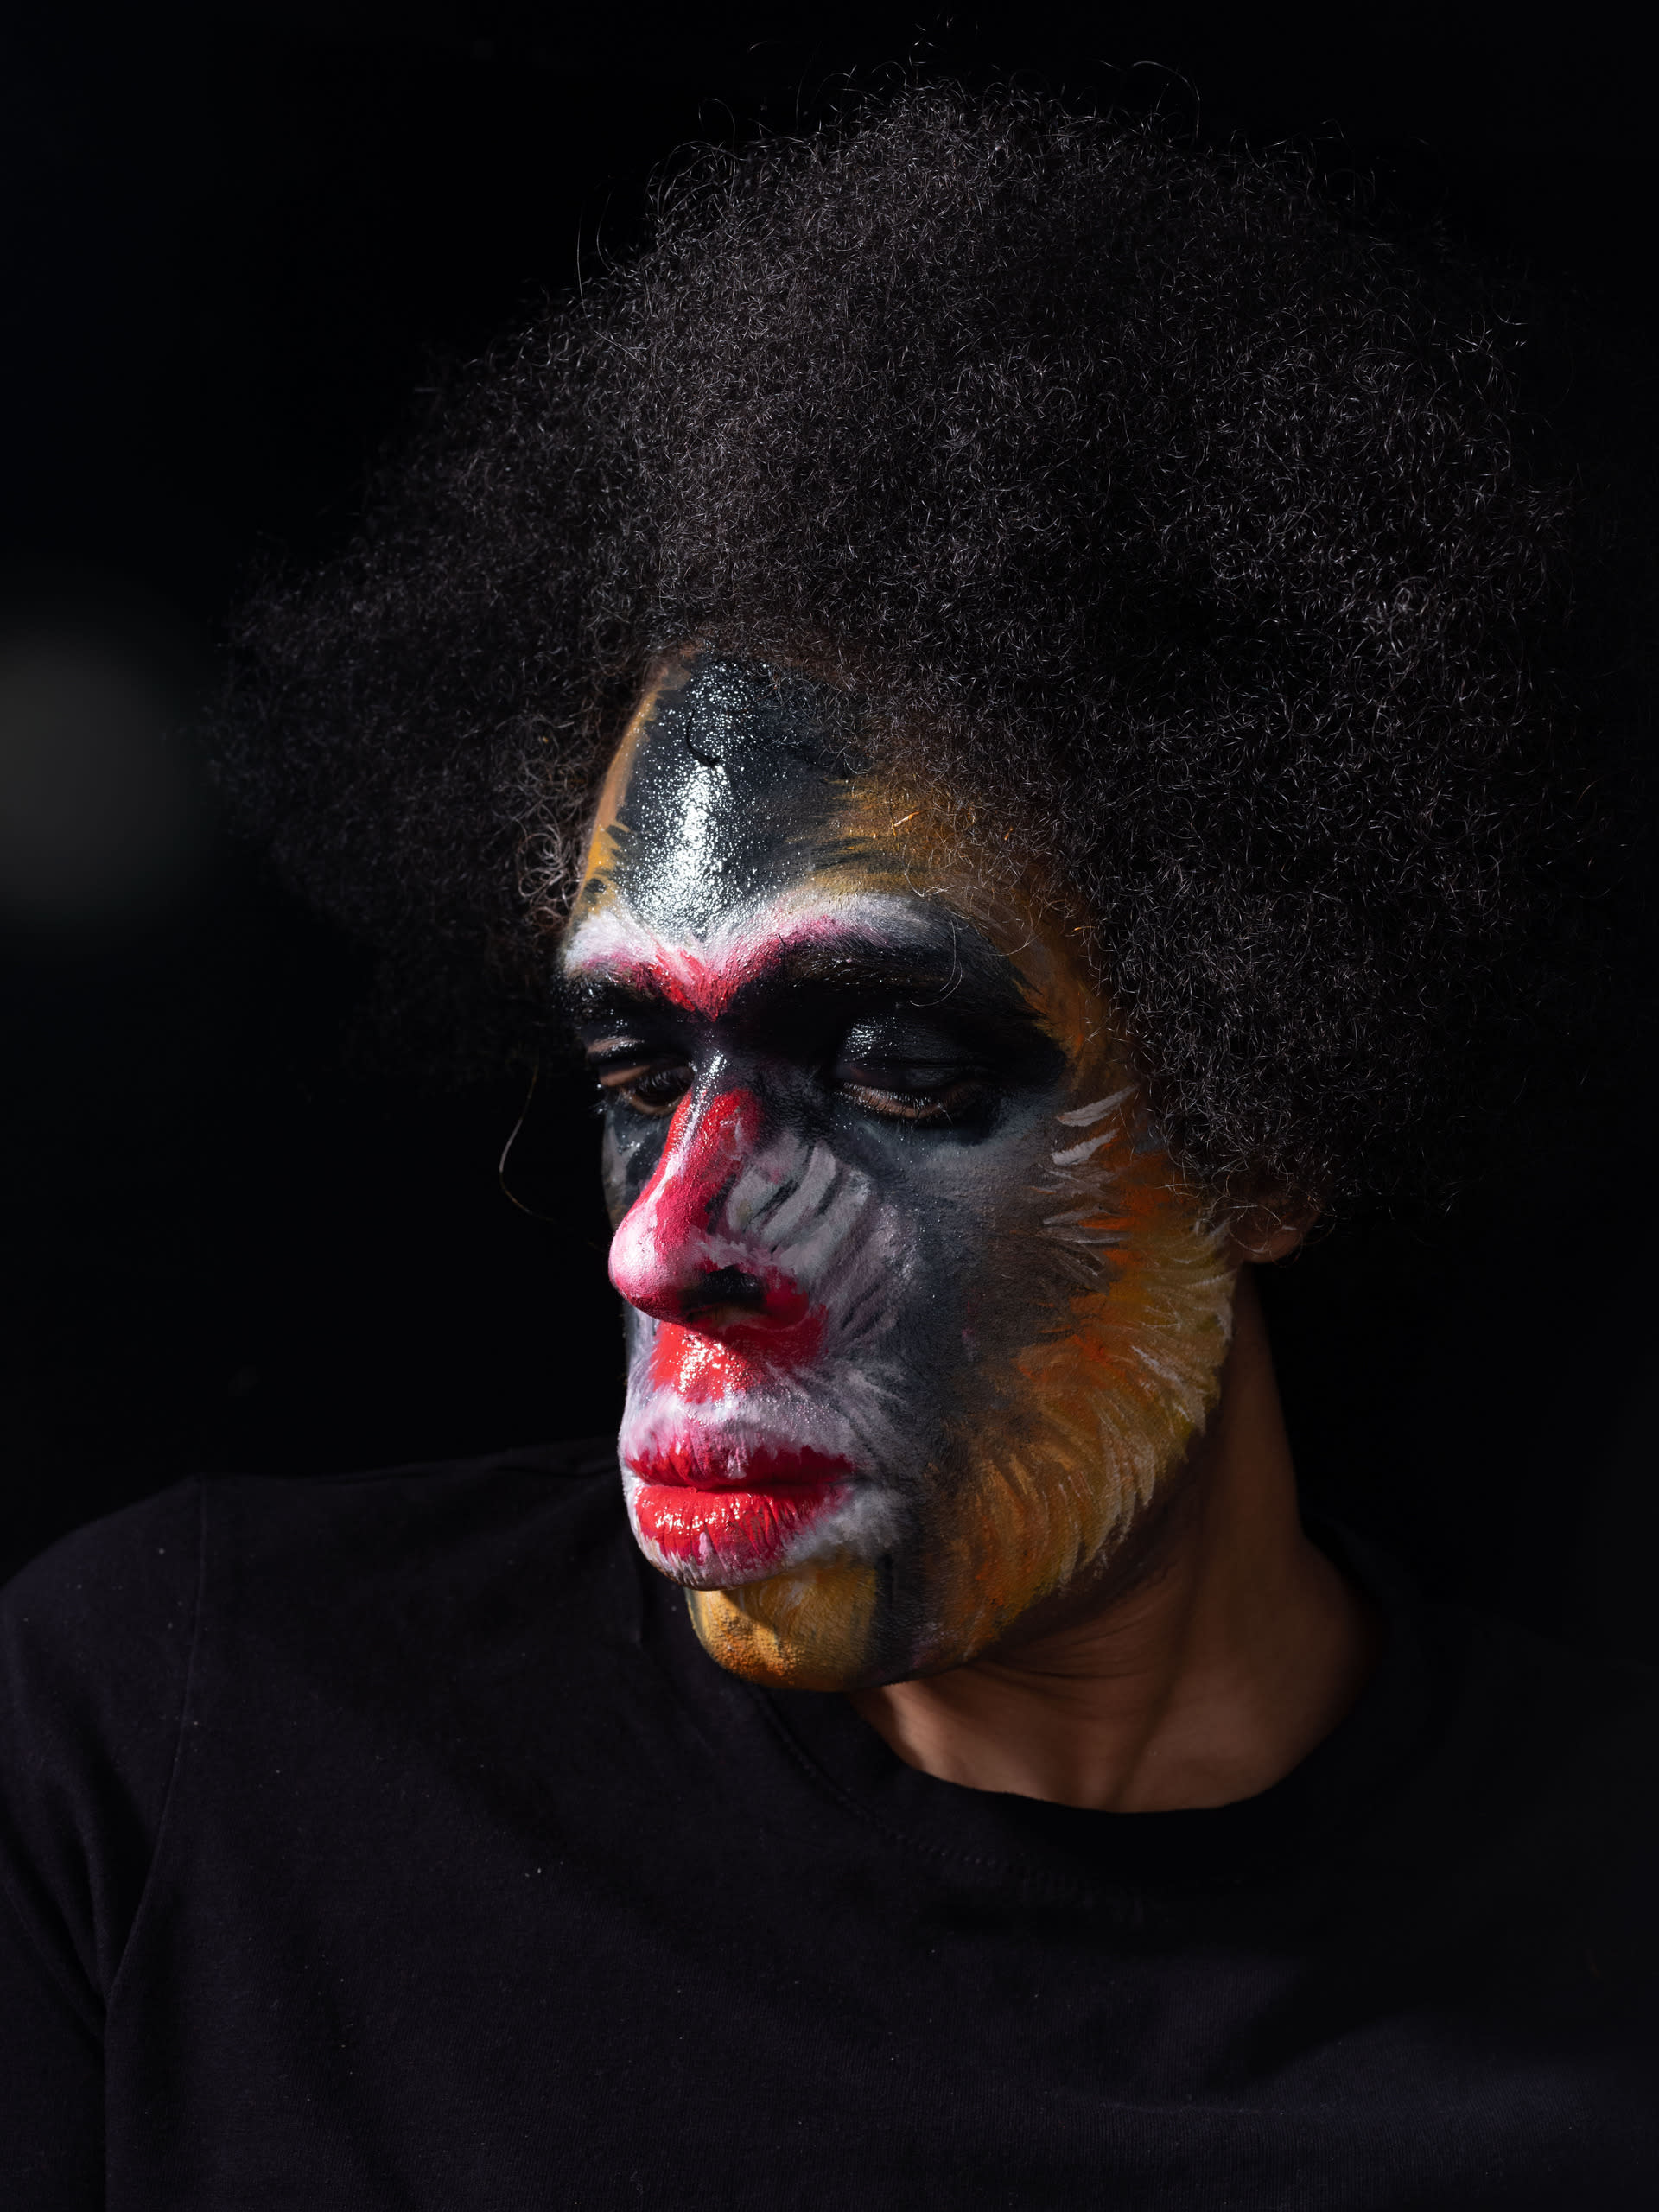 A photograph of myself, face paint as a Mandrill, in a black background